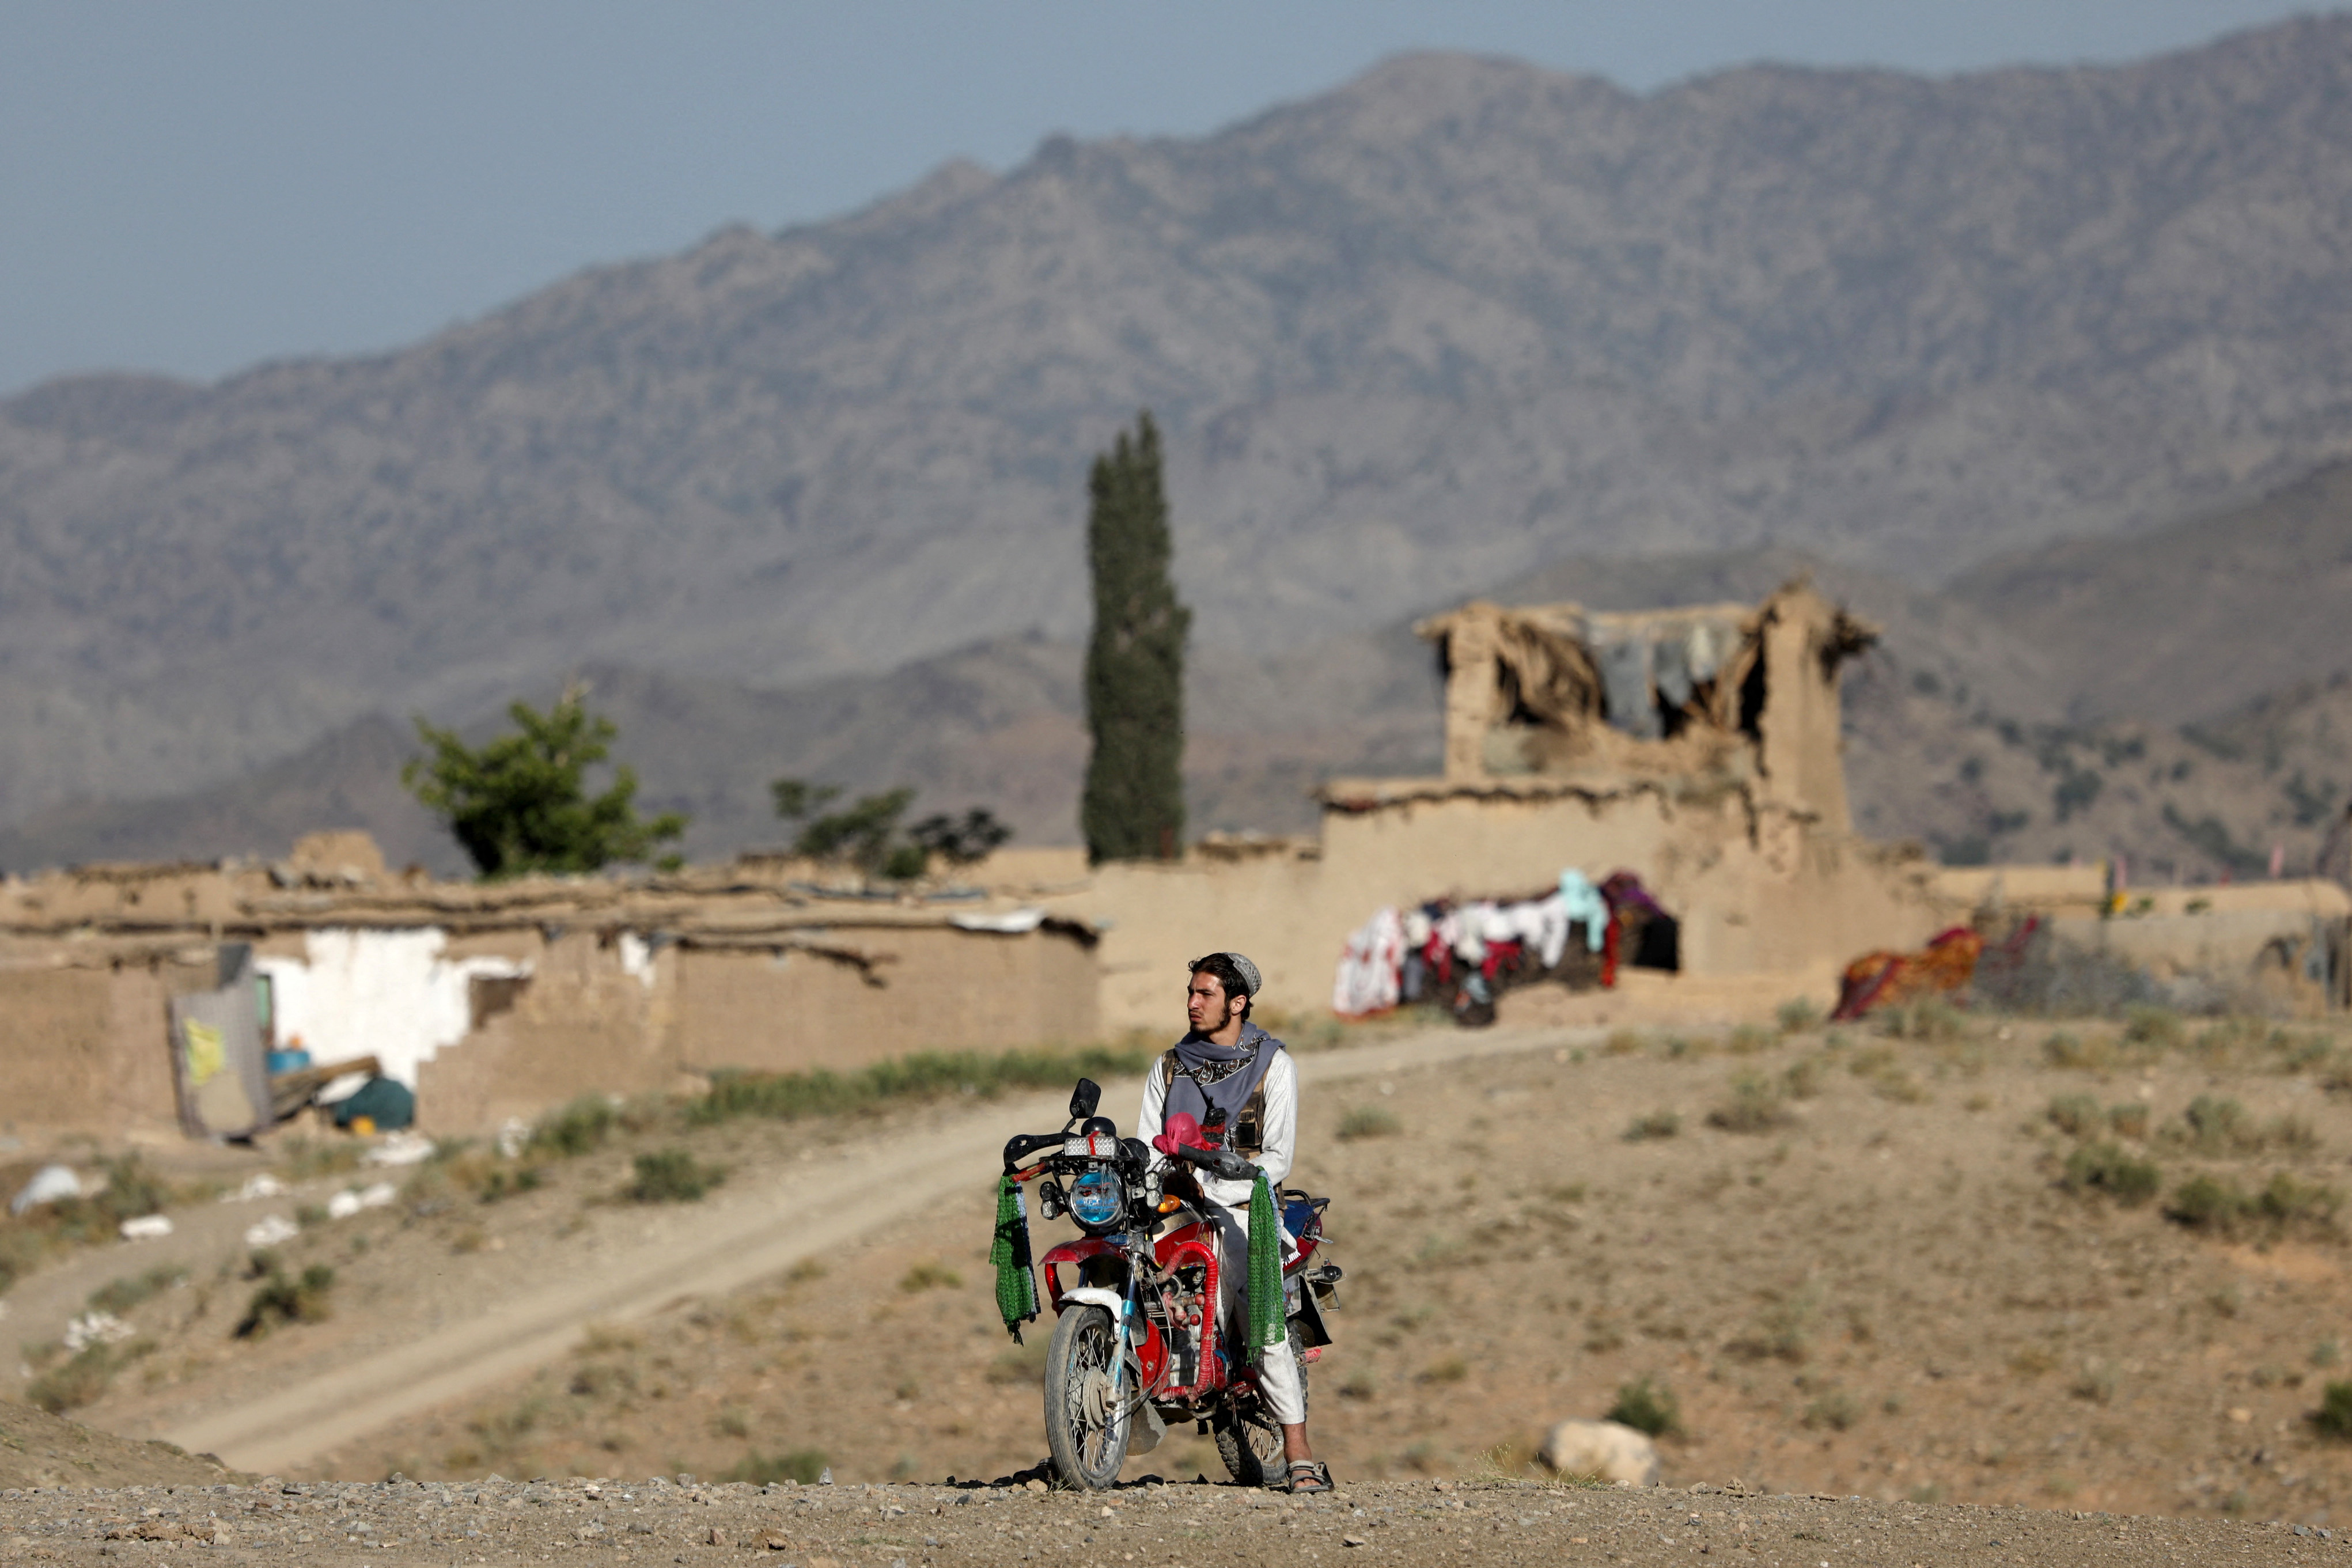 An Afghan man sits on a motorbike in the quake-hit area of Wor Kali village